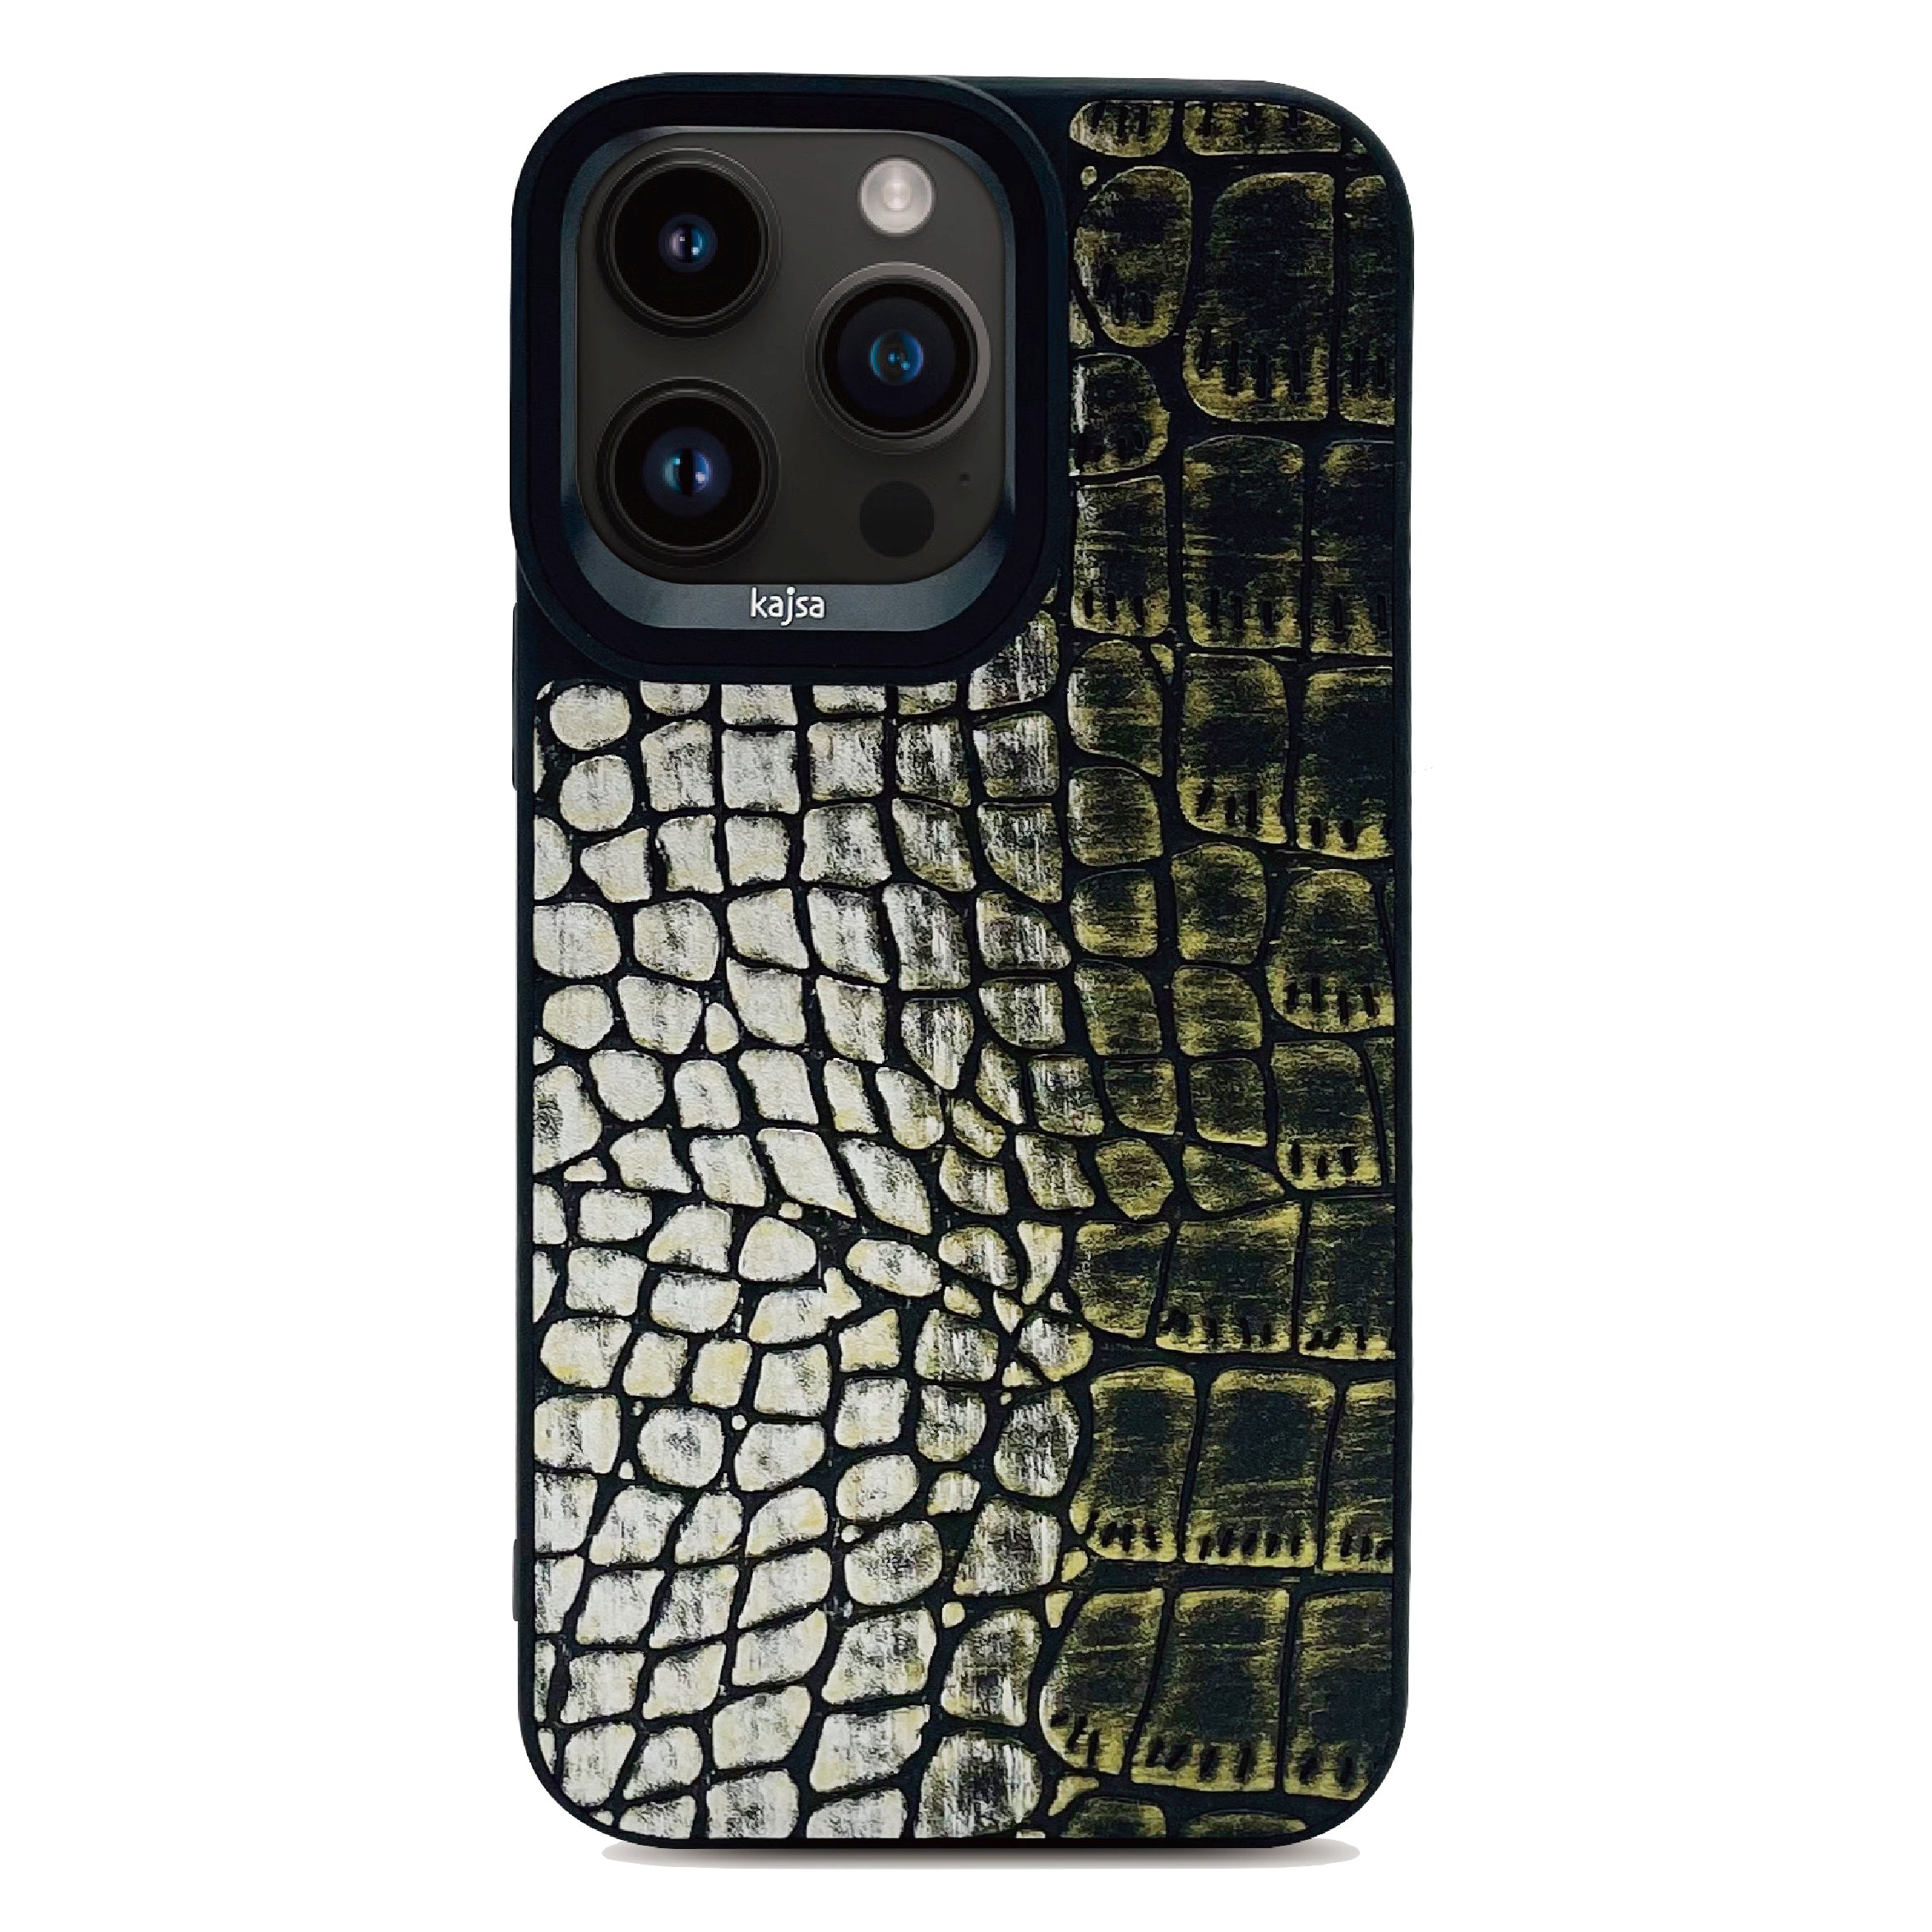 Glamorous Collection - Dual Snake Pattern Back Case for iPhone 14-Phone Case- phone case - phone cases- phone cover- iphone cover- iphone case- iphone cases- leather case- leather cases- DIYCASE - custom case - leather cover - hand strap case - croco pattern case - snake pattern case - carbon fiber phone case - phone case brand - unique phone case - high quality - phone case brand - protective case - buy phone case hong kong - online buy phone case - iphone‎手機殼 - 客製化手機殼 - samsung ‎手機殼 - 香港手機殼 - 買電話殼